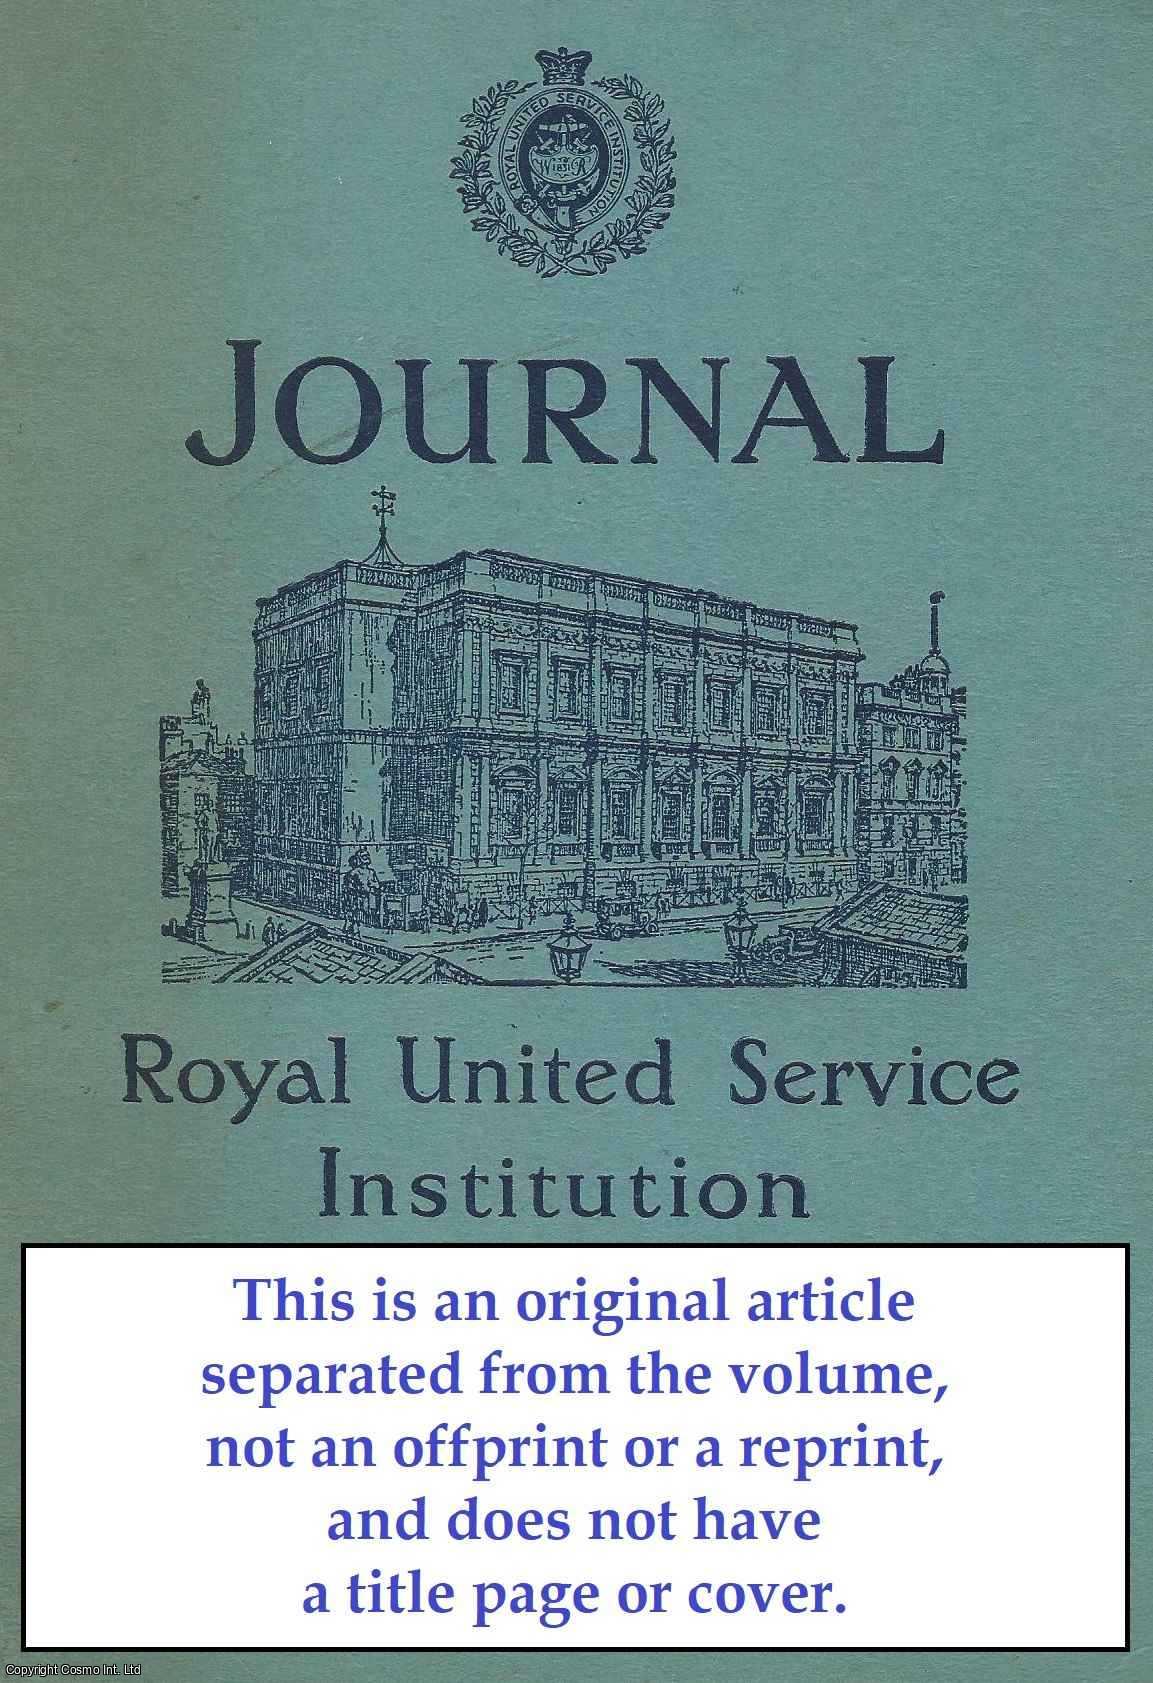 John Mander - Our Allies: The Federal German Republic. Their Problems and Outlook. An original article from The Royal United Service Institution Journal, 1965.